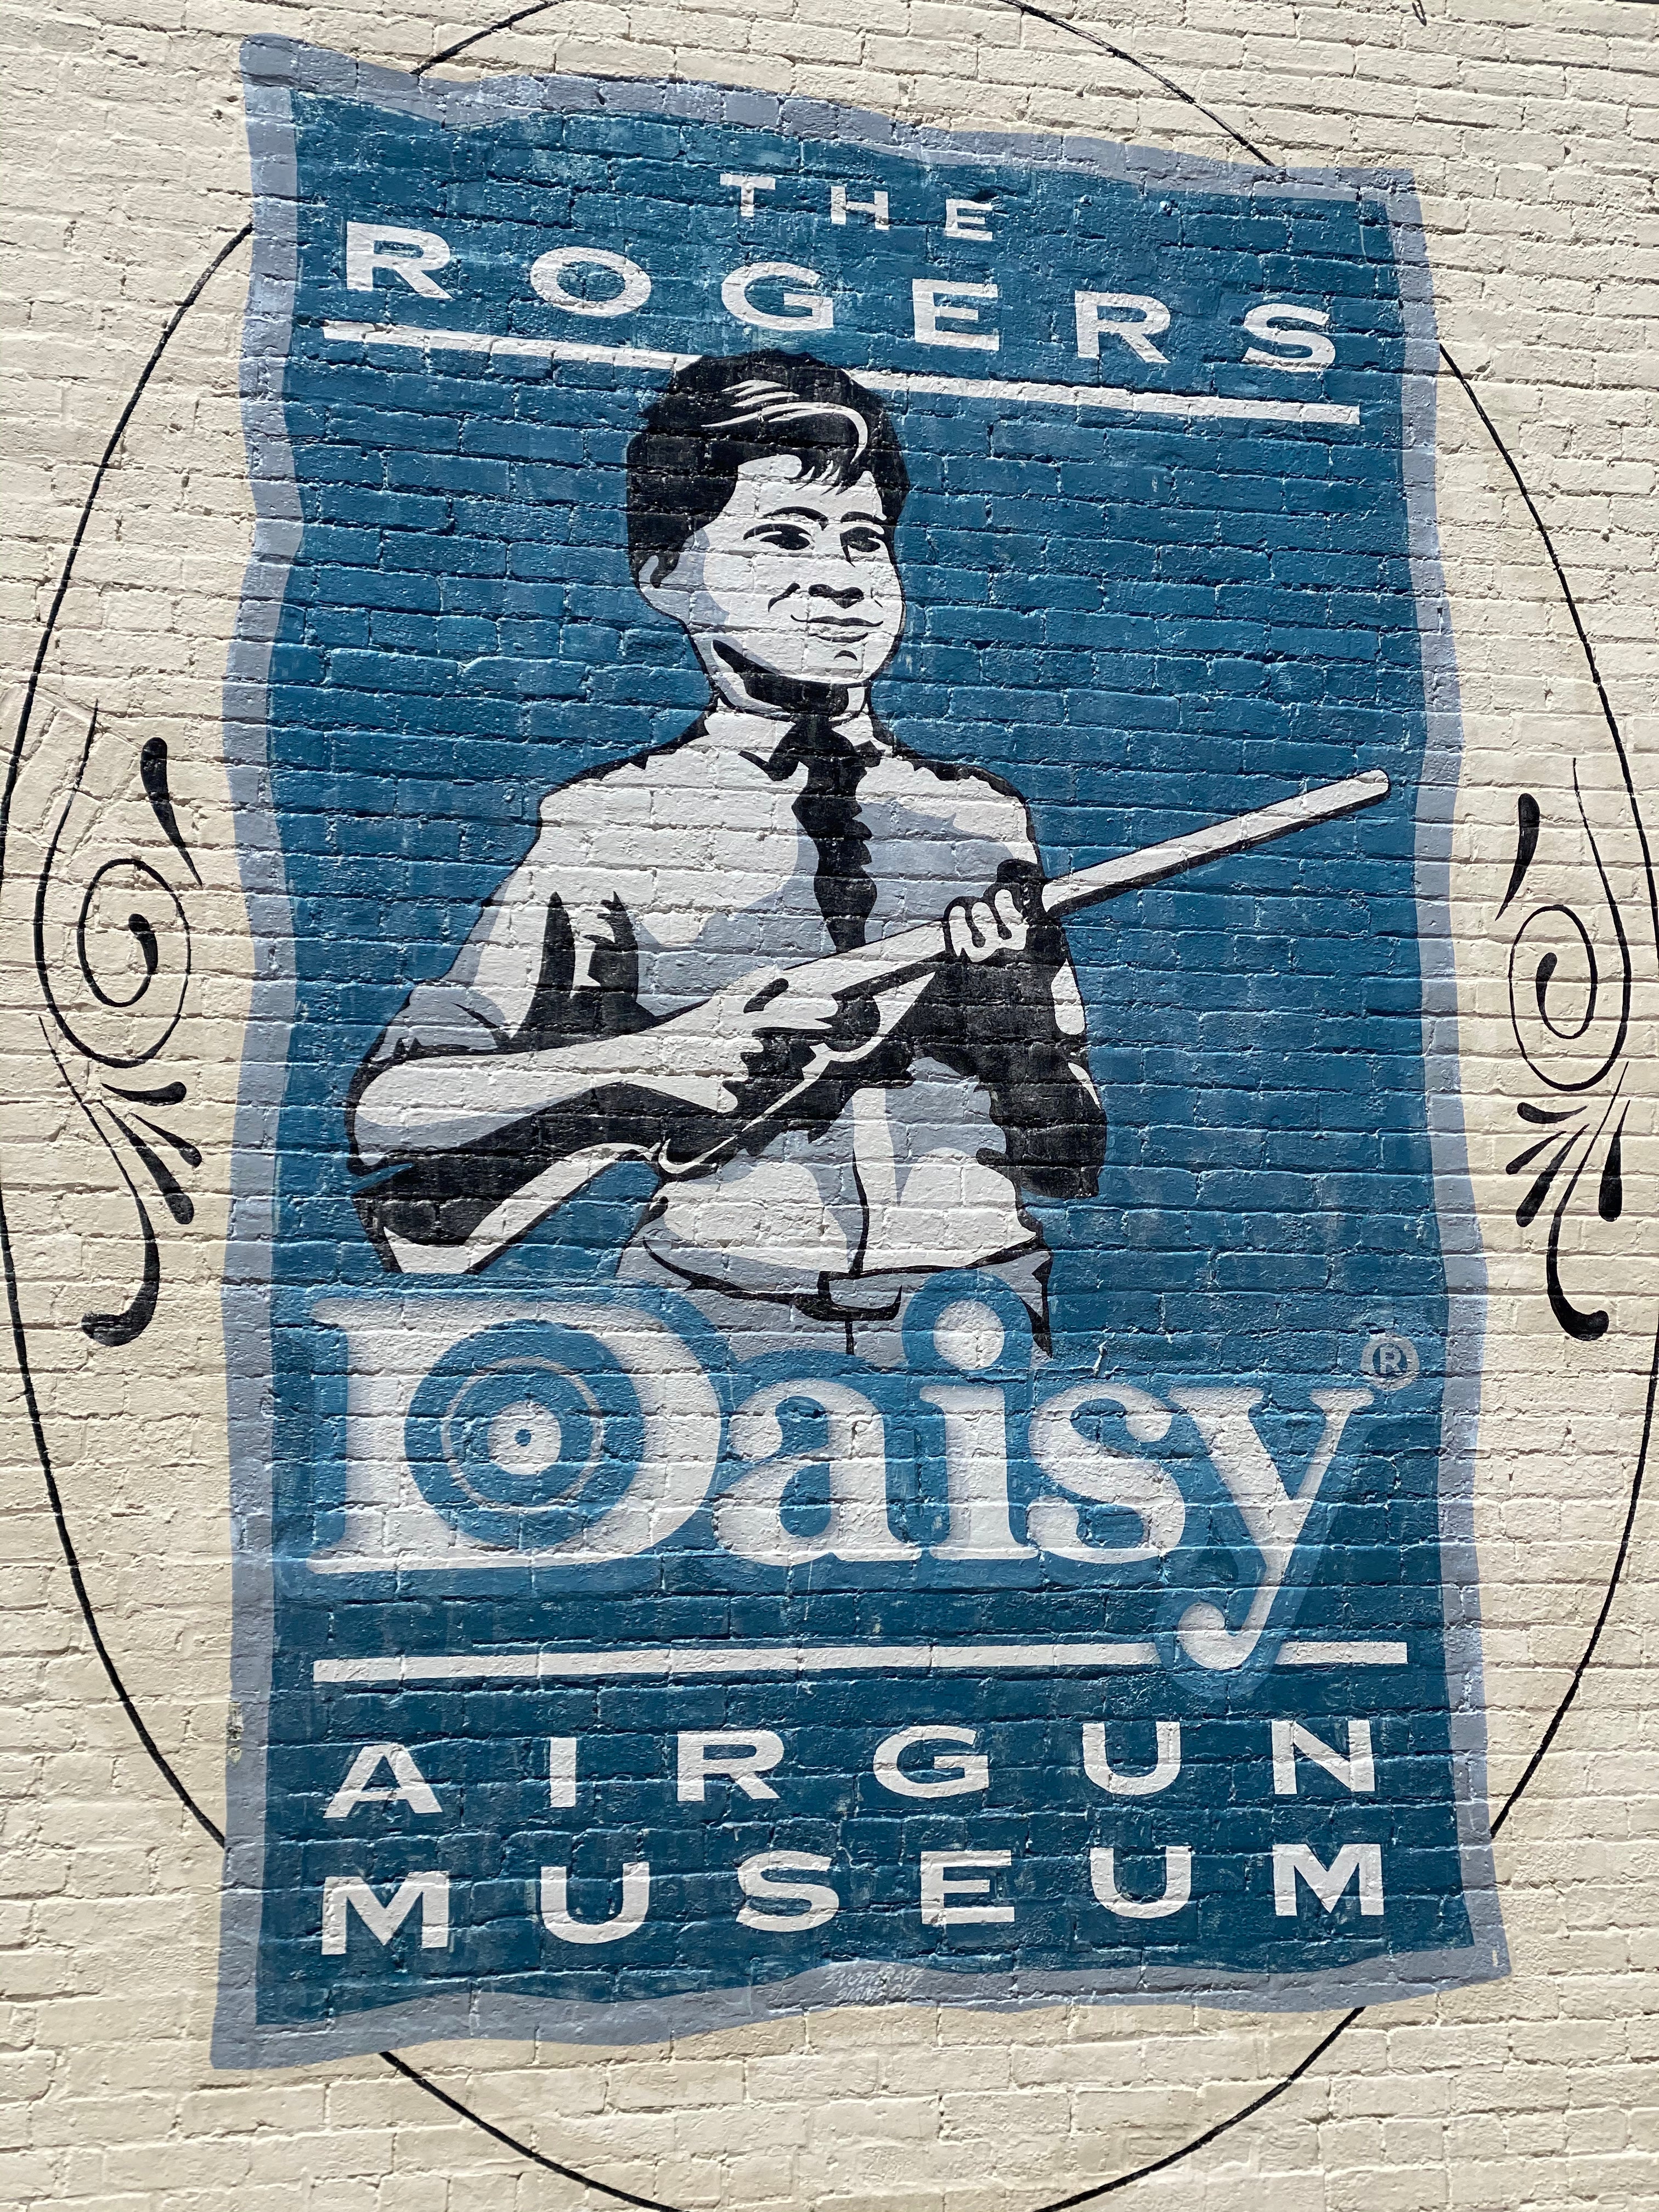 Downtown has some neat things to check out including the Daisy AirGun museum